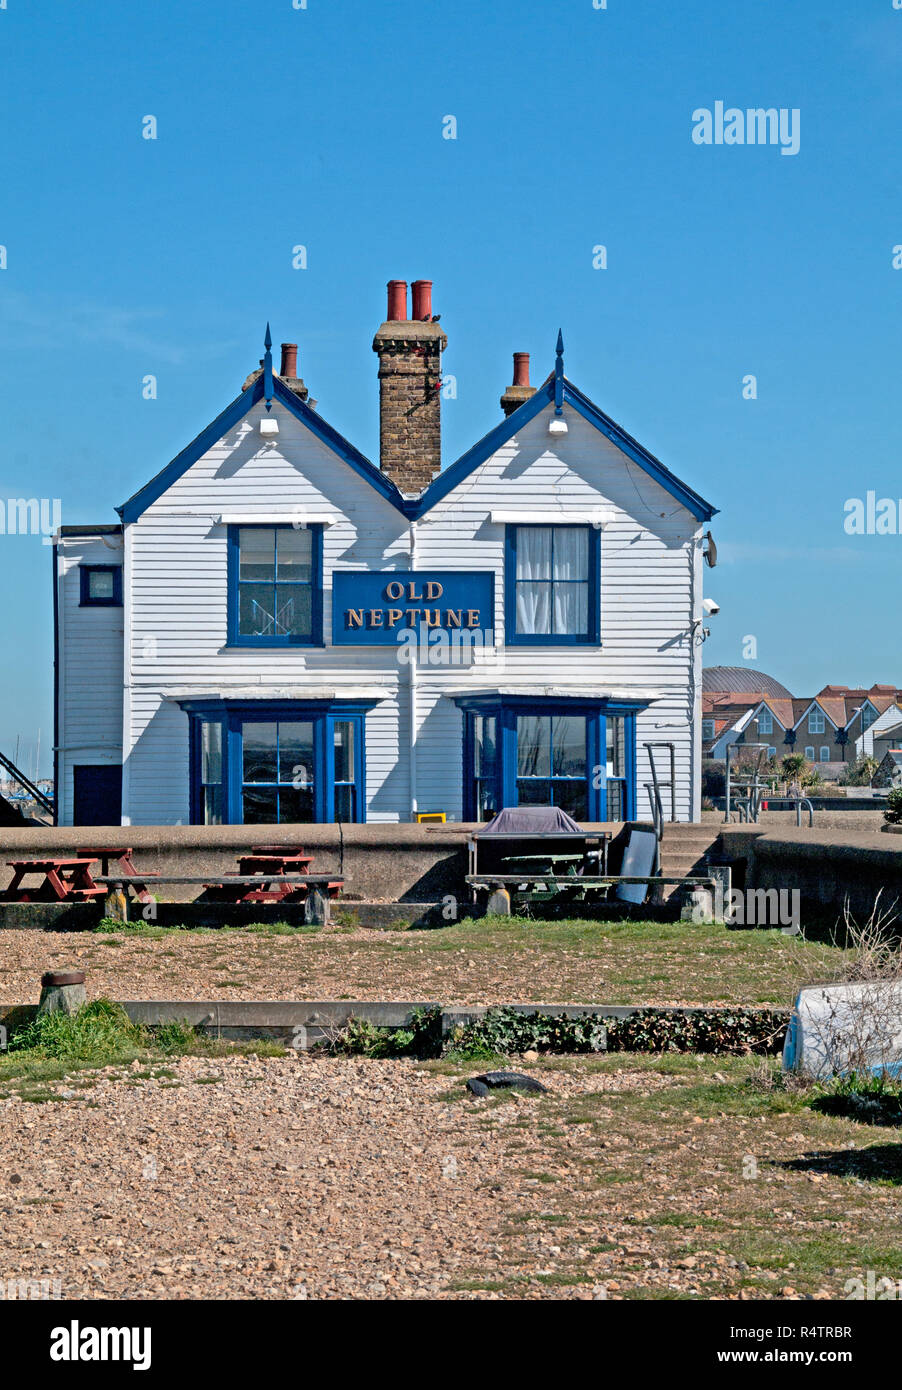 Whitstable, vieille Pub, Neptune Beach, Kent, Angleterre ; Banque D'Images